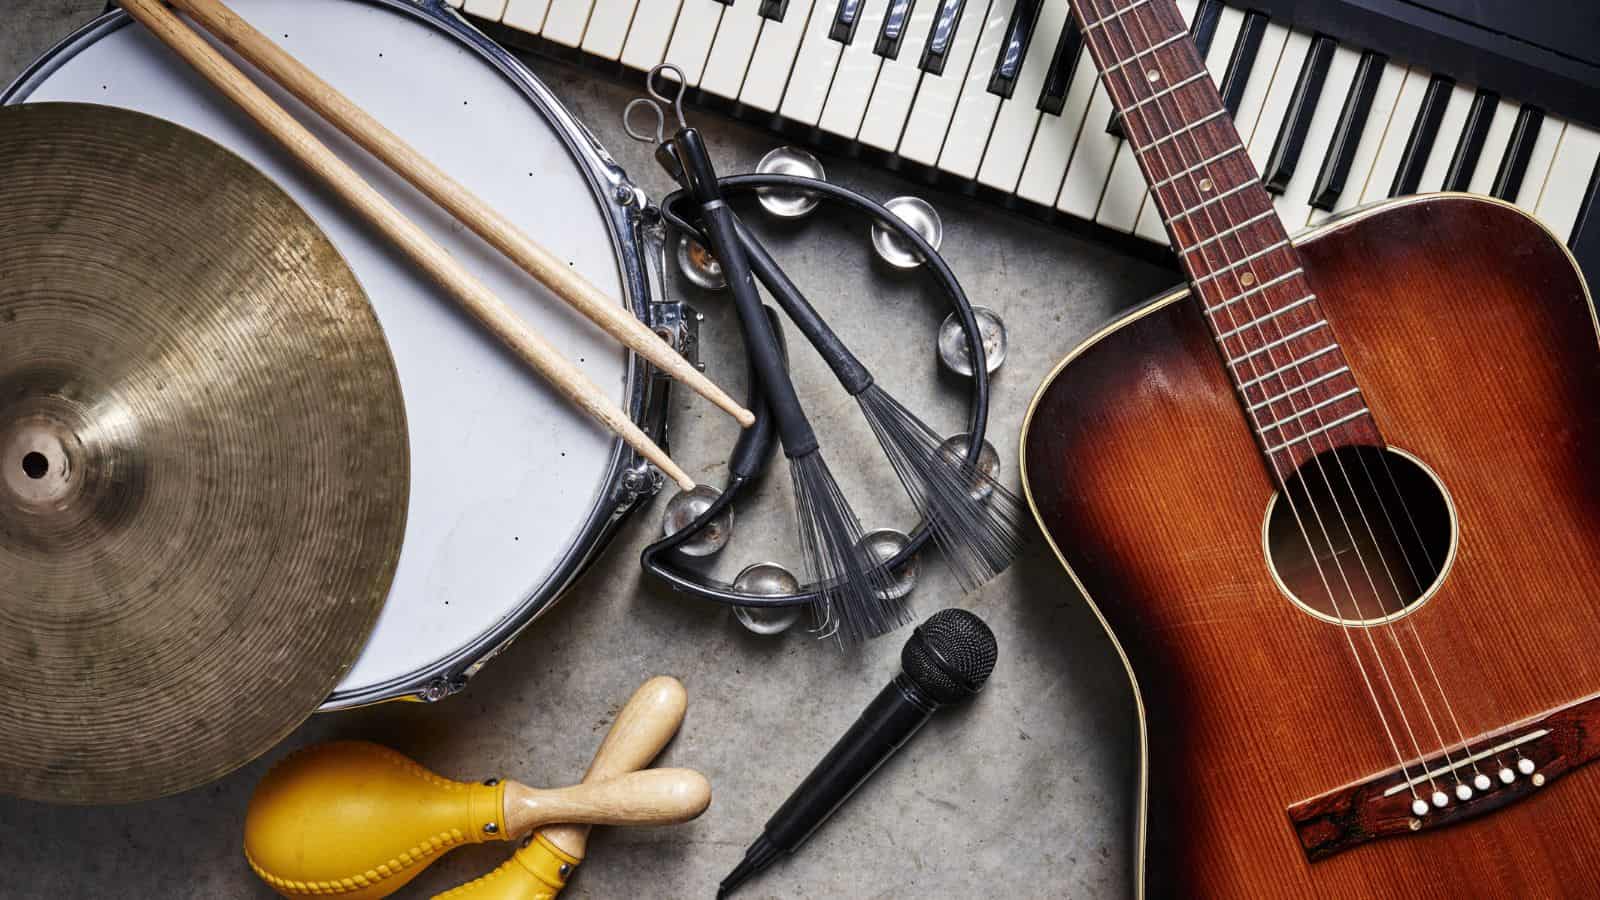 <p>Many people buy instruments and then never use them. These unused instruments often end up in yard sales. You can get really good deals on musical instruments such as guitars and keyboards at yard sales and pay just a fraction of what you would for something new.</p>